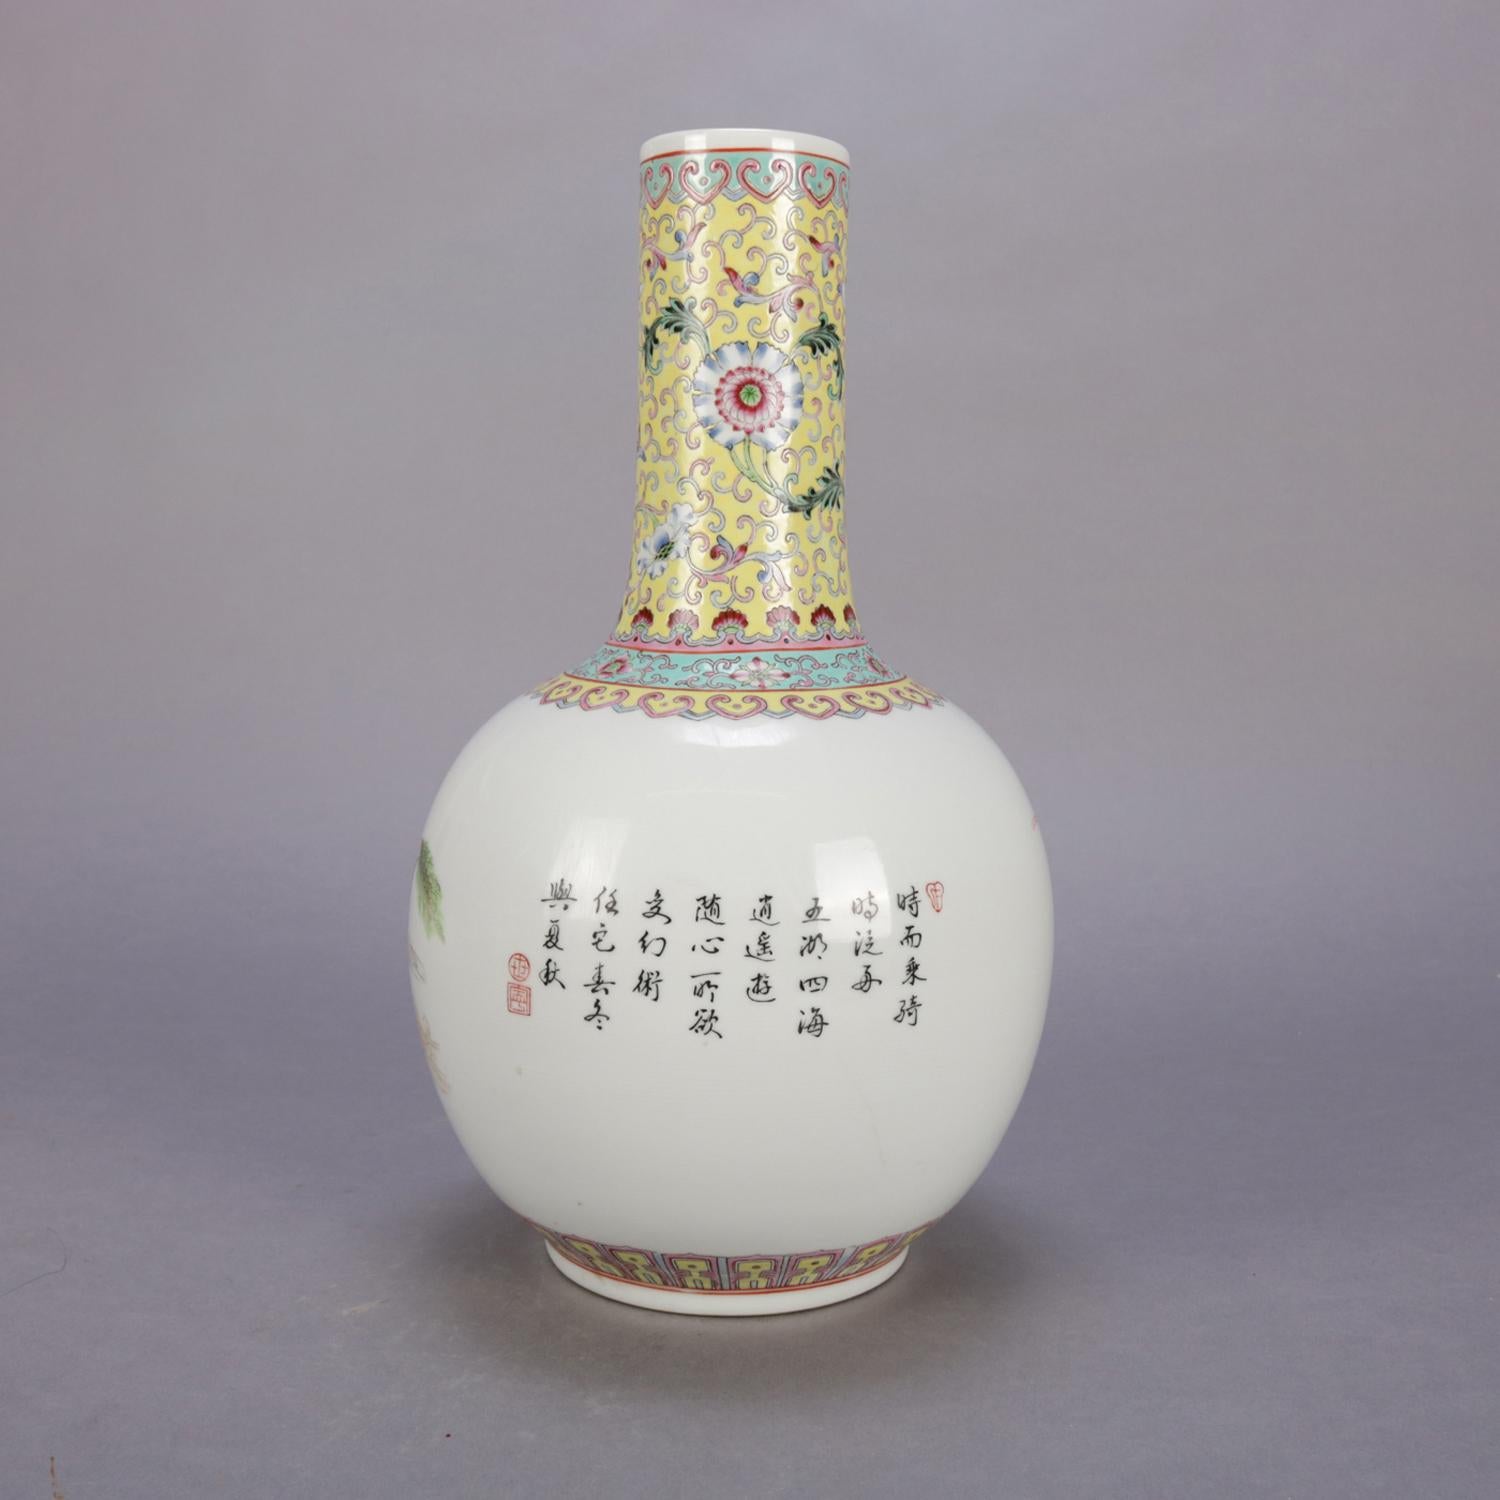 20th Century Chinese Enameled Porcelain Pictorial Vase, Chop Mark Signed and Verbiage